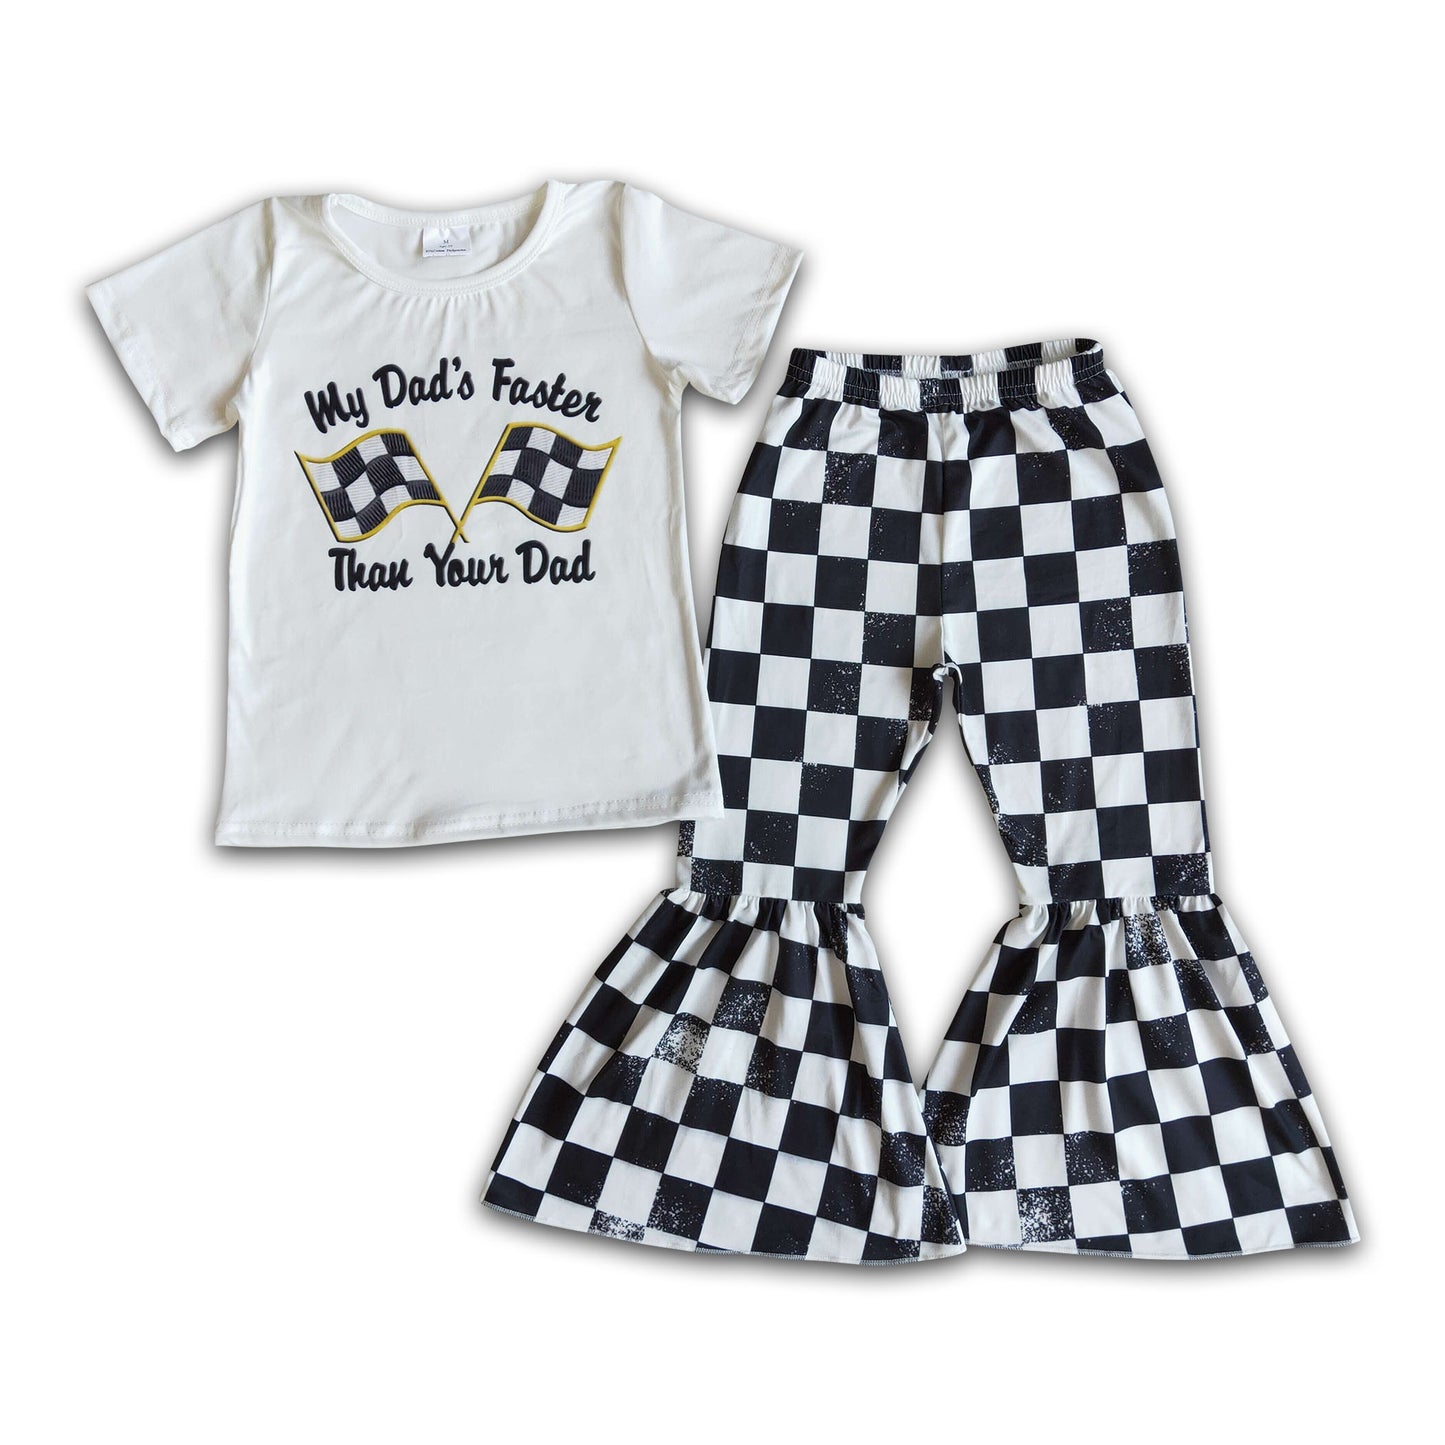 My dad's faster than your dad flag shirt plaid pants girls children clothing set